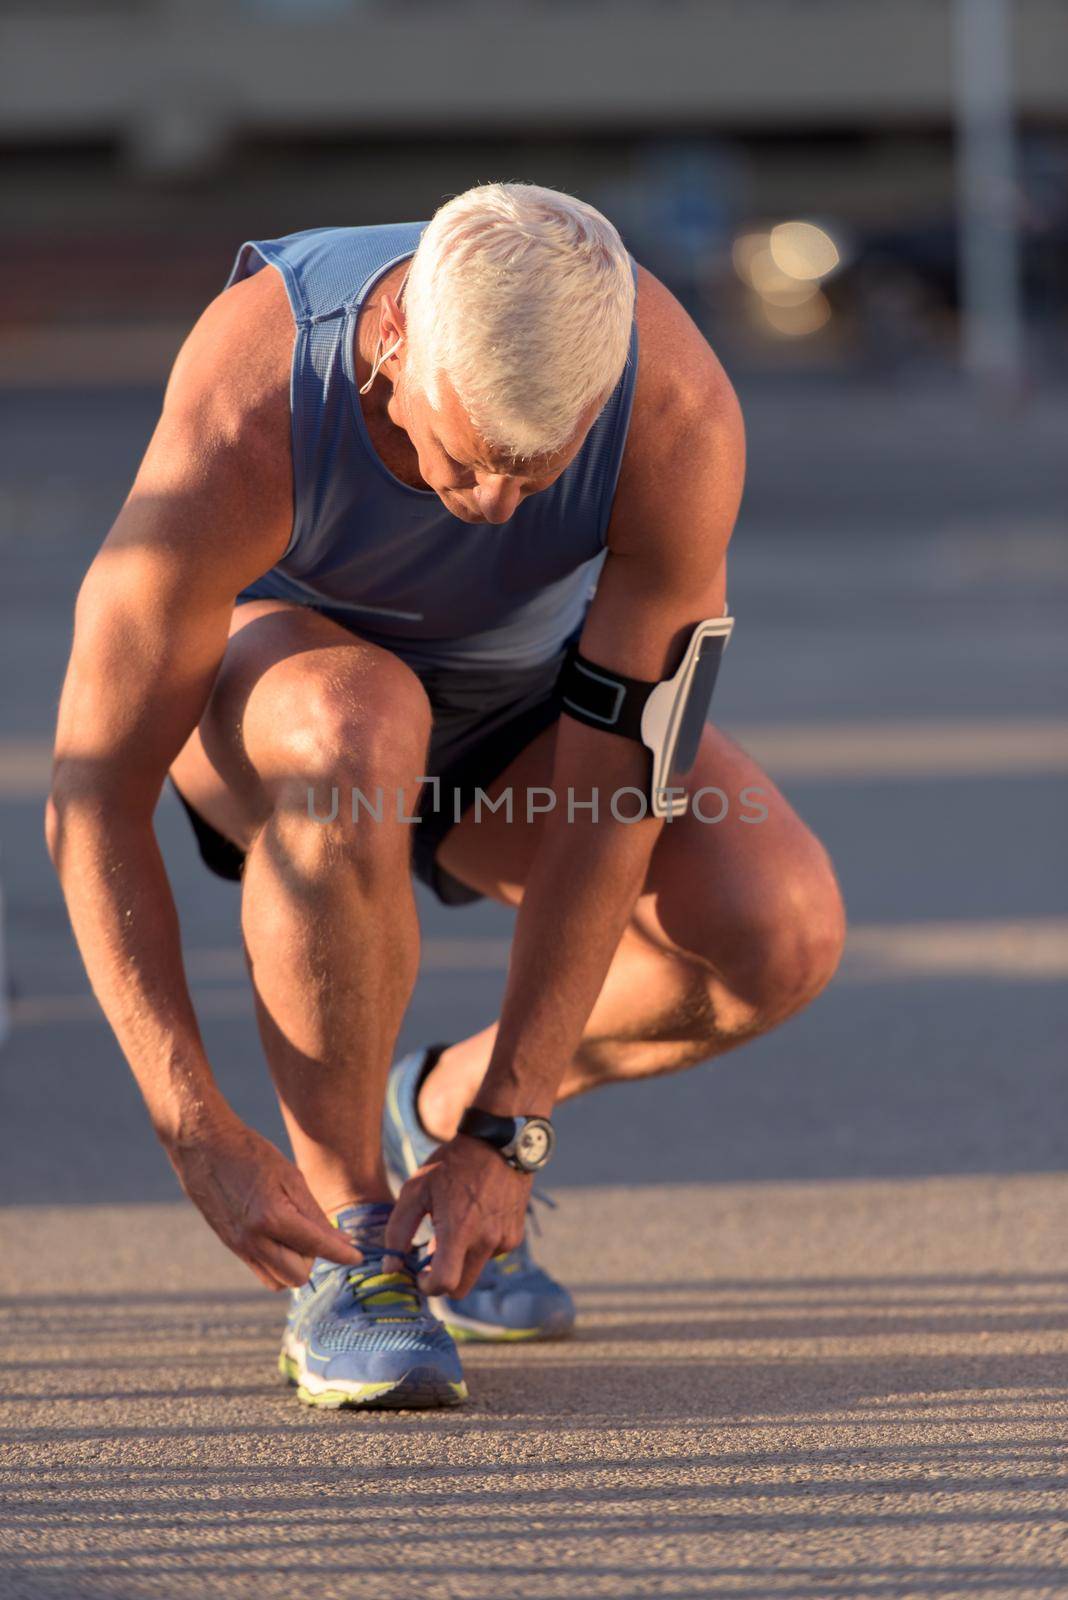 Man tying running shoes laces  before jogging workout